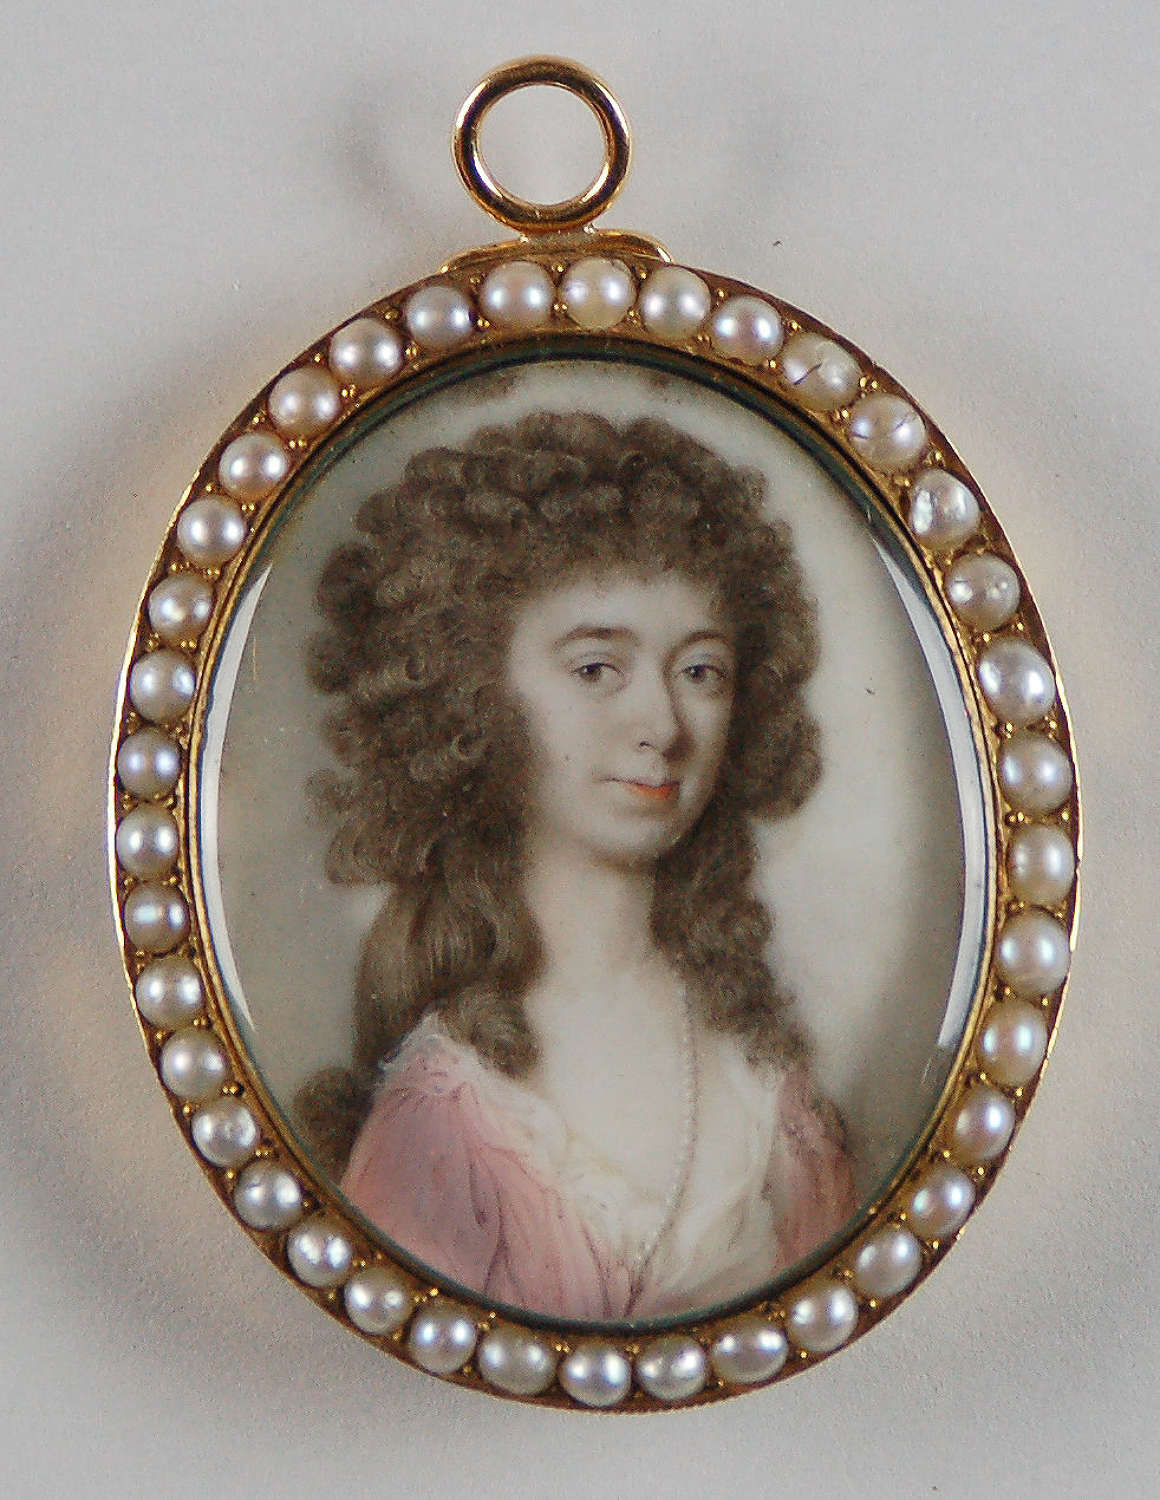 Miniature of lady by artist 'V' C1775